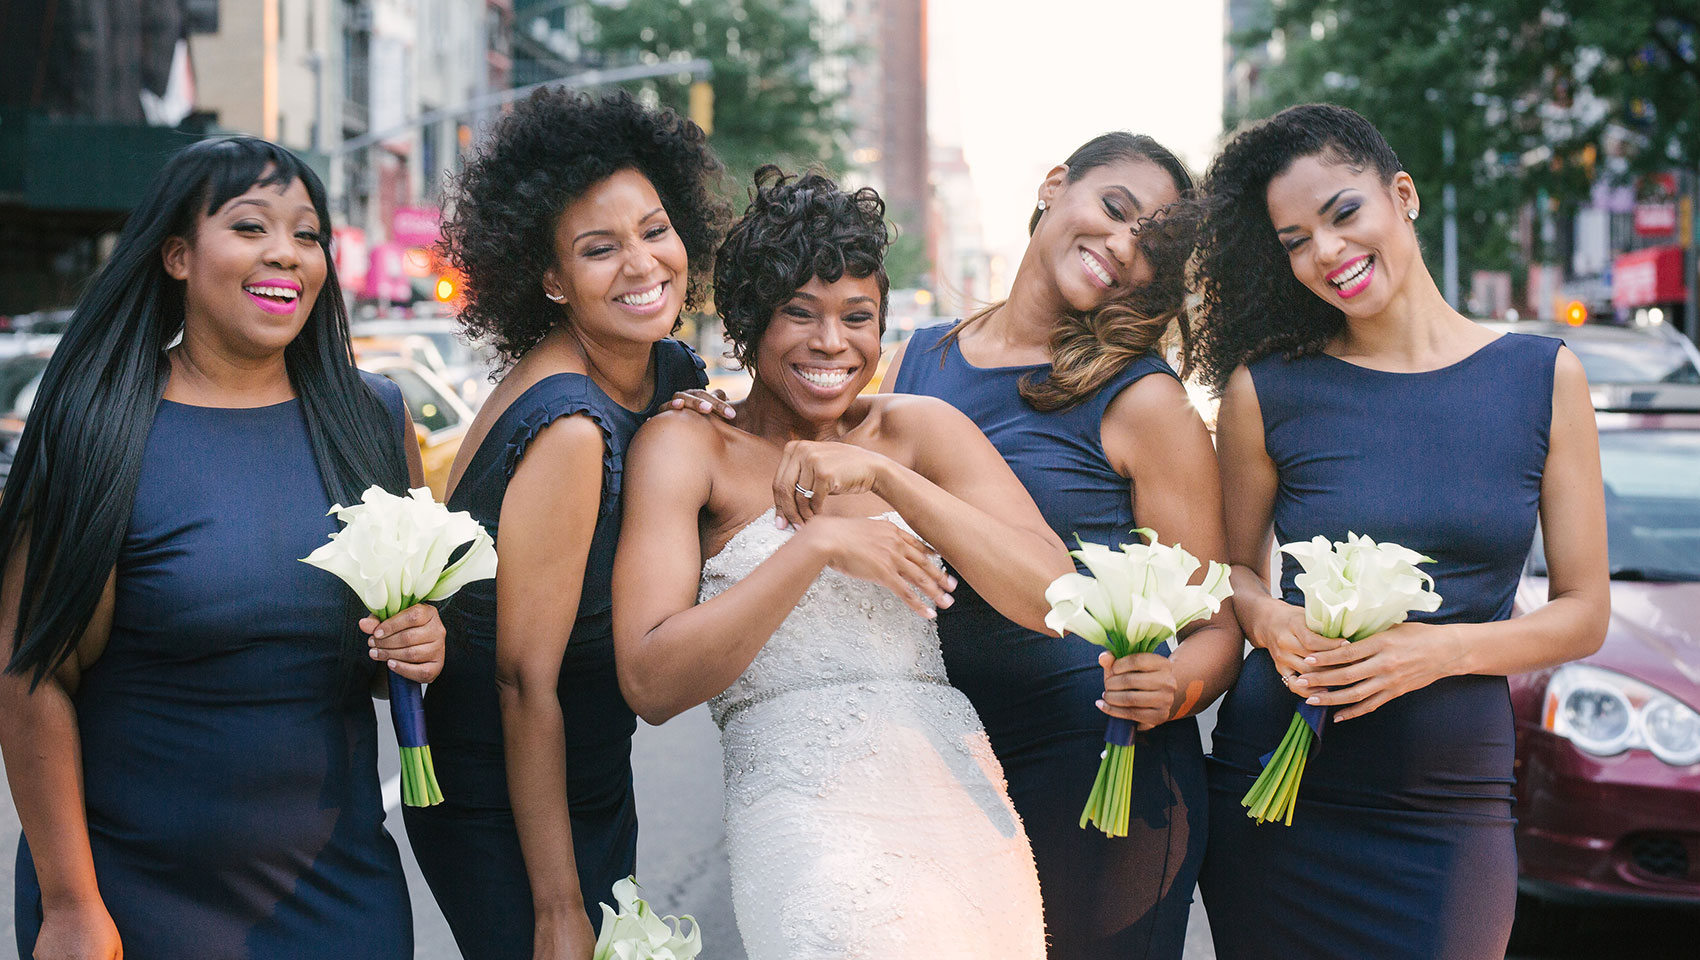 Ahkilah in her wedding dress with bridesmaids holding flowers on a street crosswalk